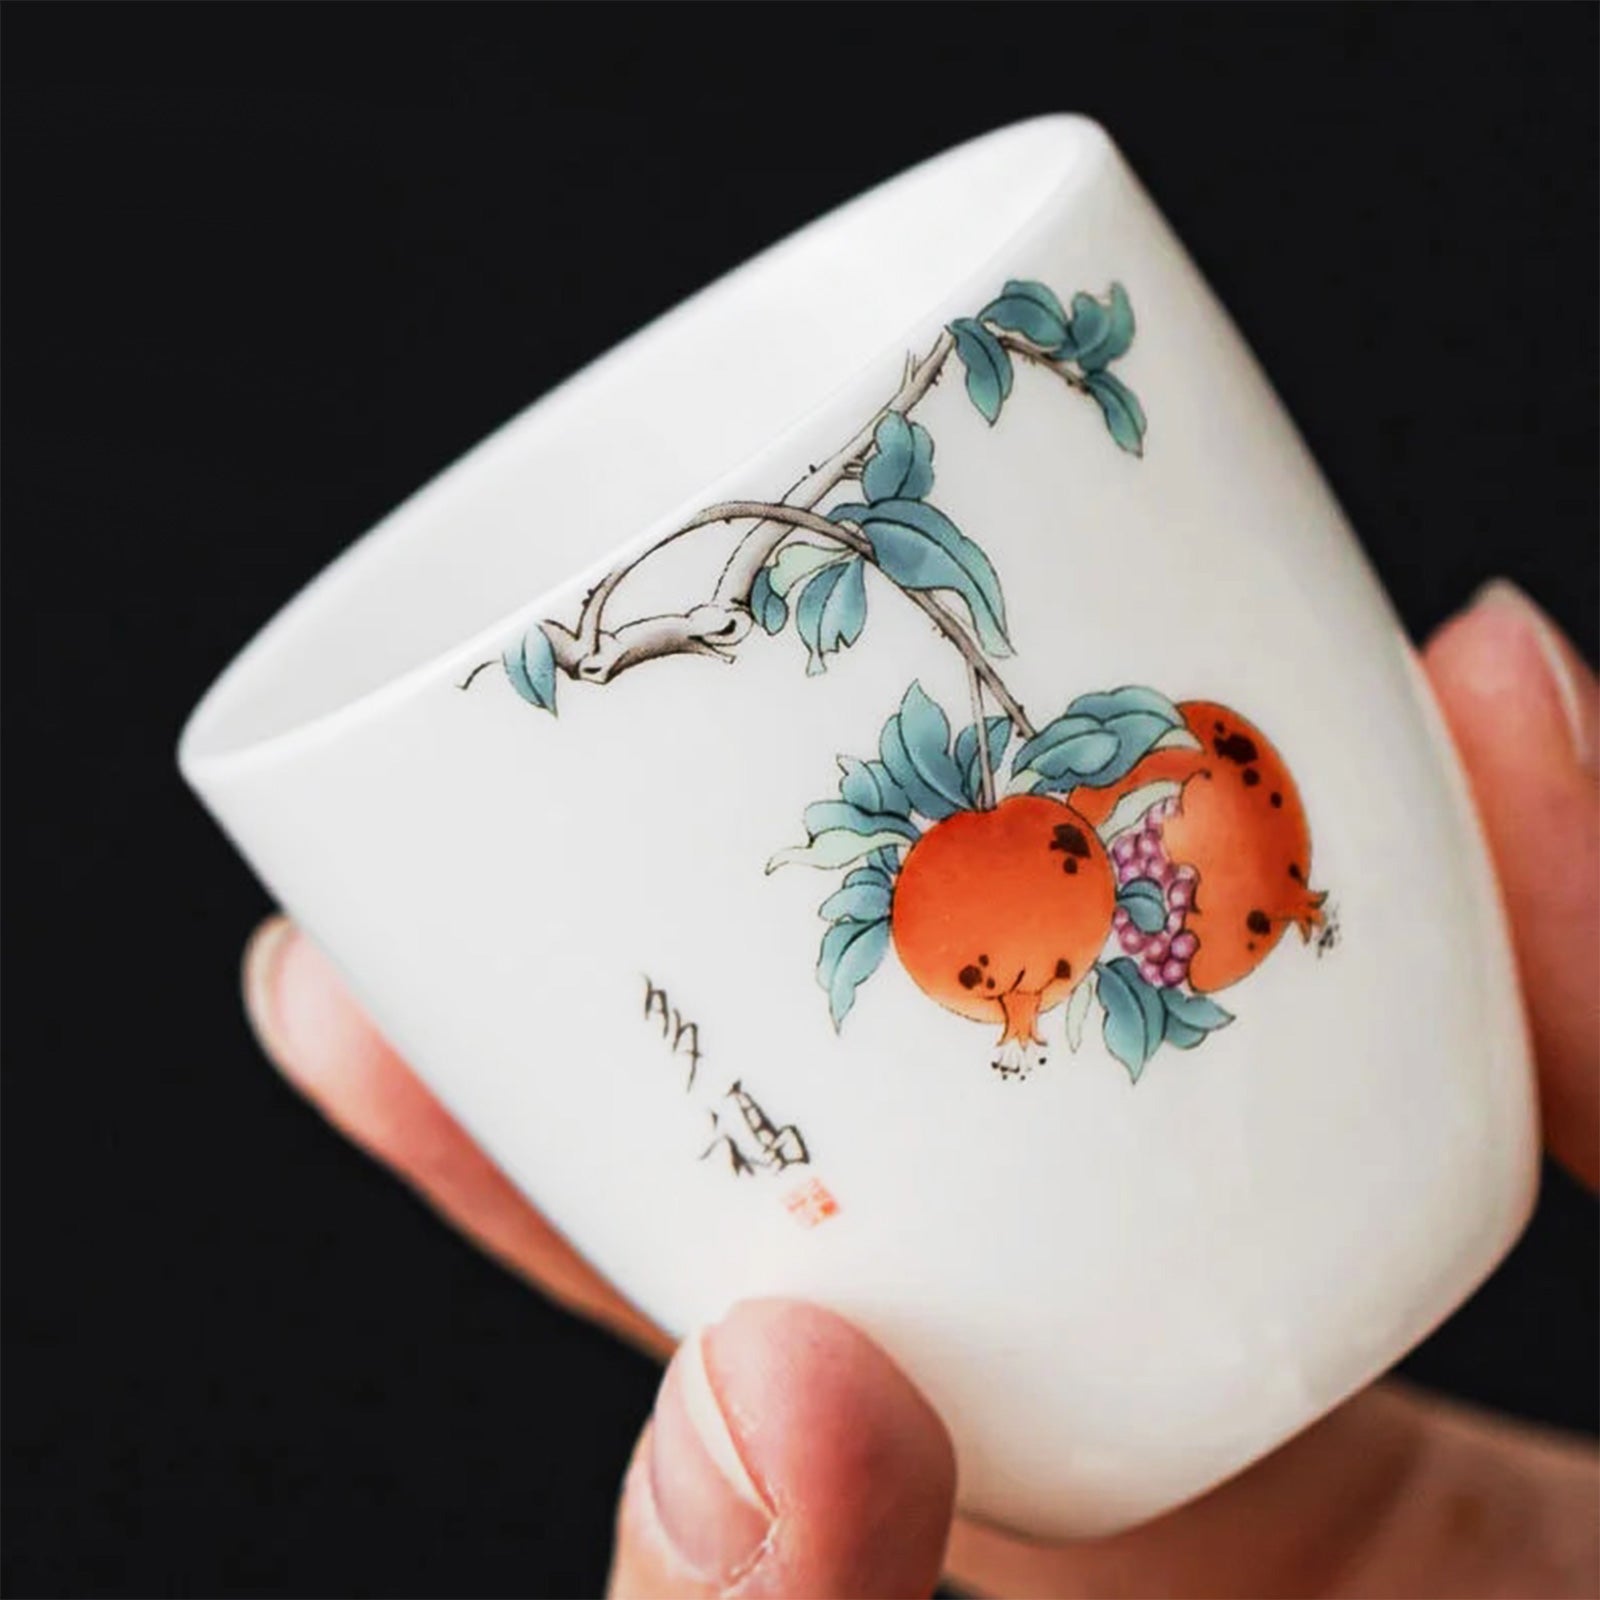 Exquisite Tea Cups with Detailed Drawings